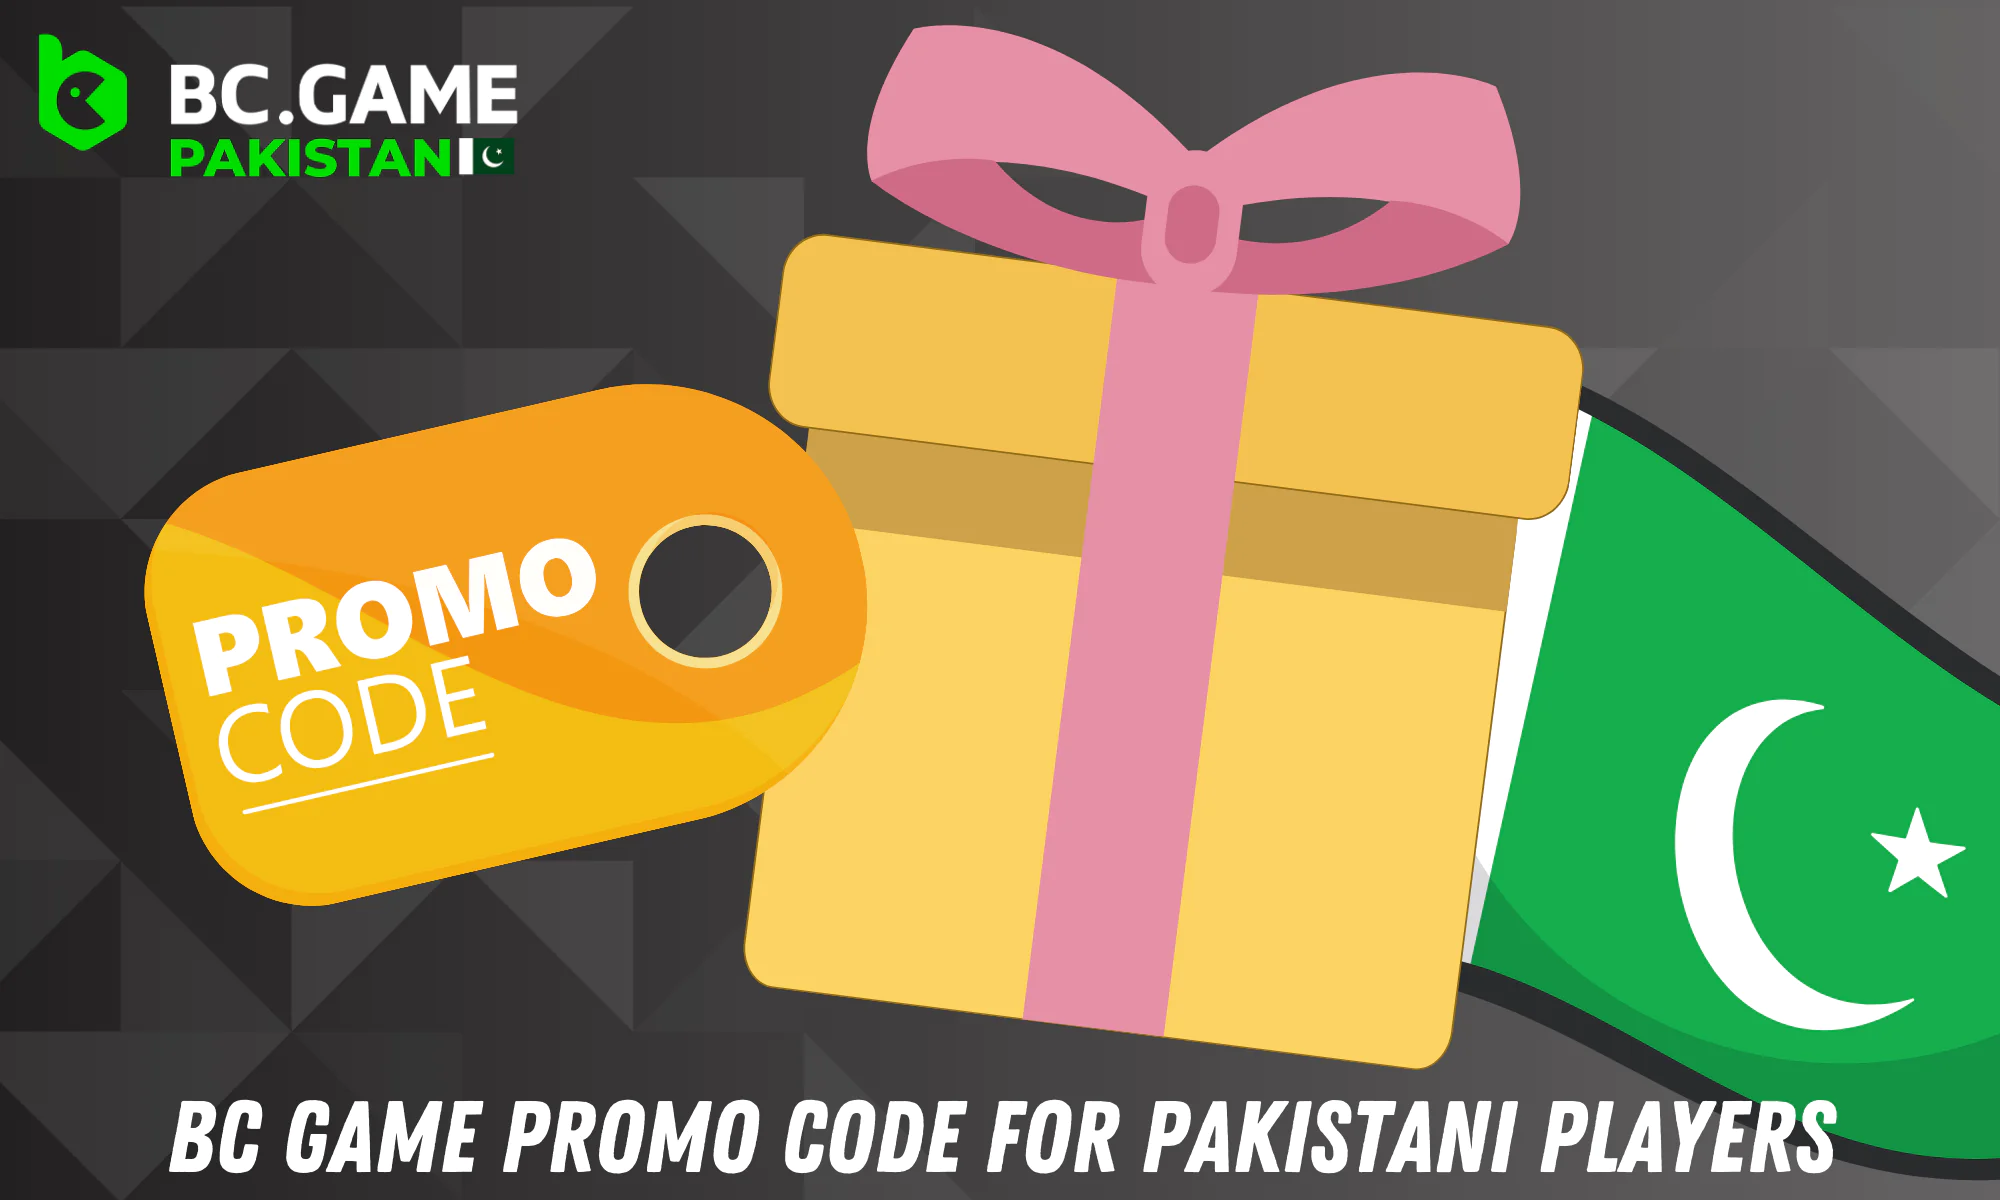 BC Game constantly offers different bonus codes for players from Pakistan